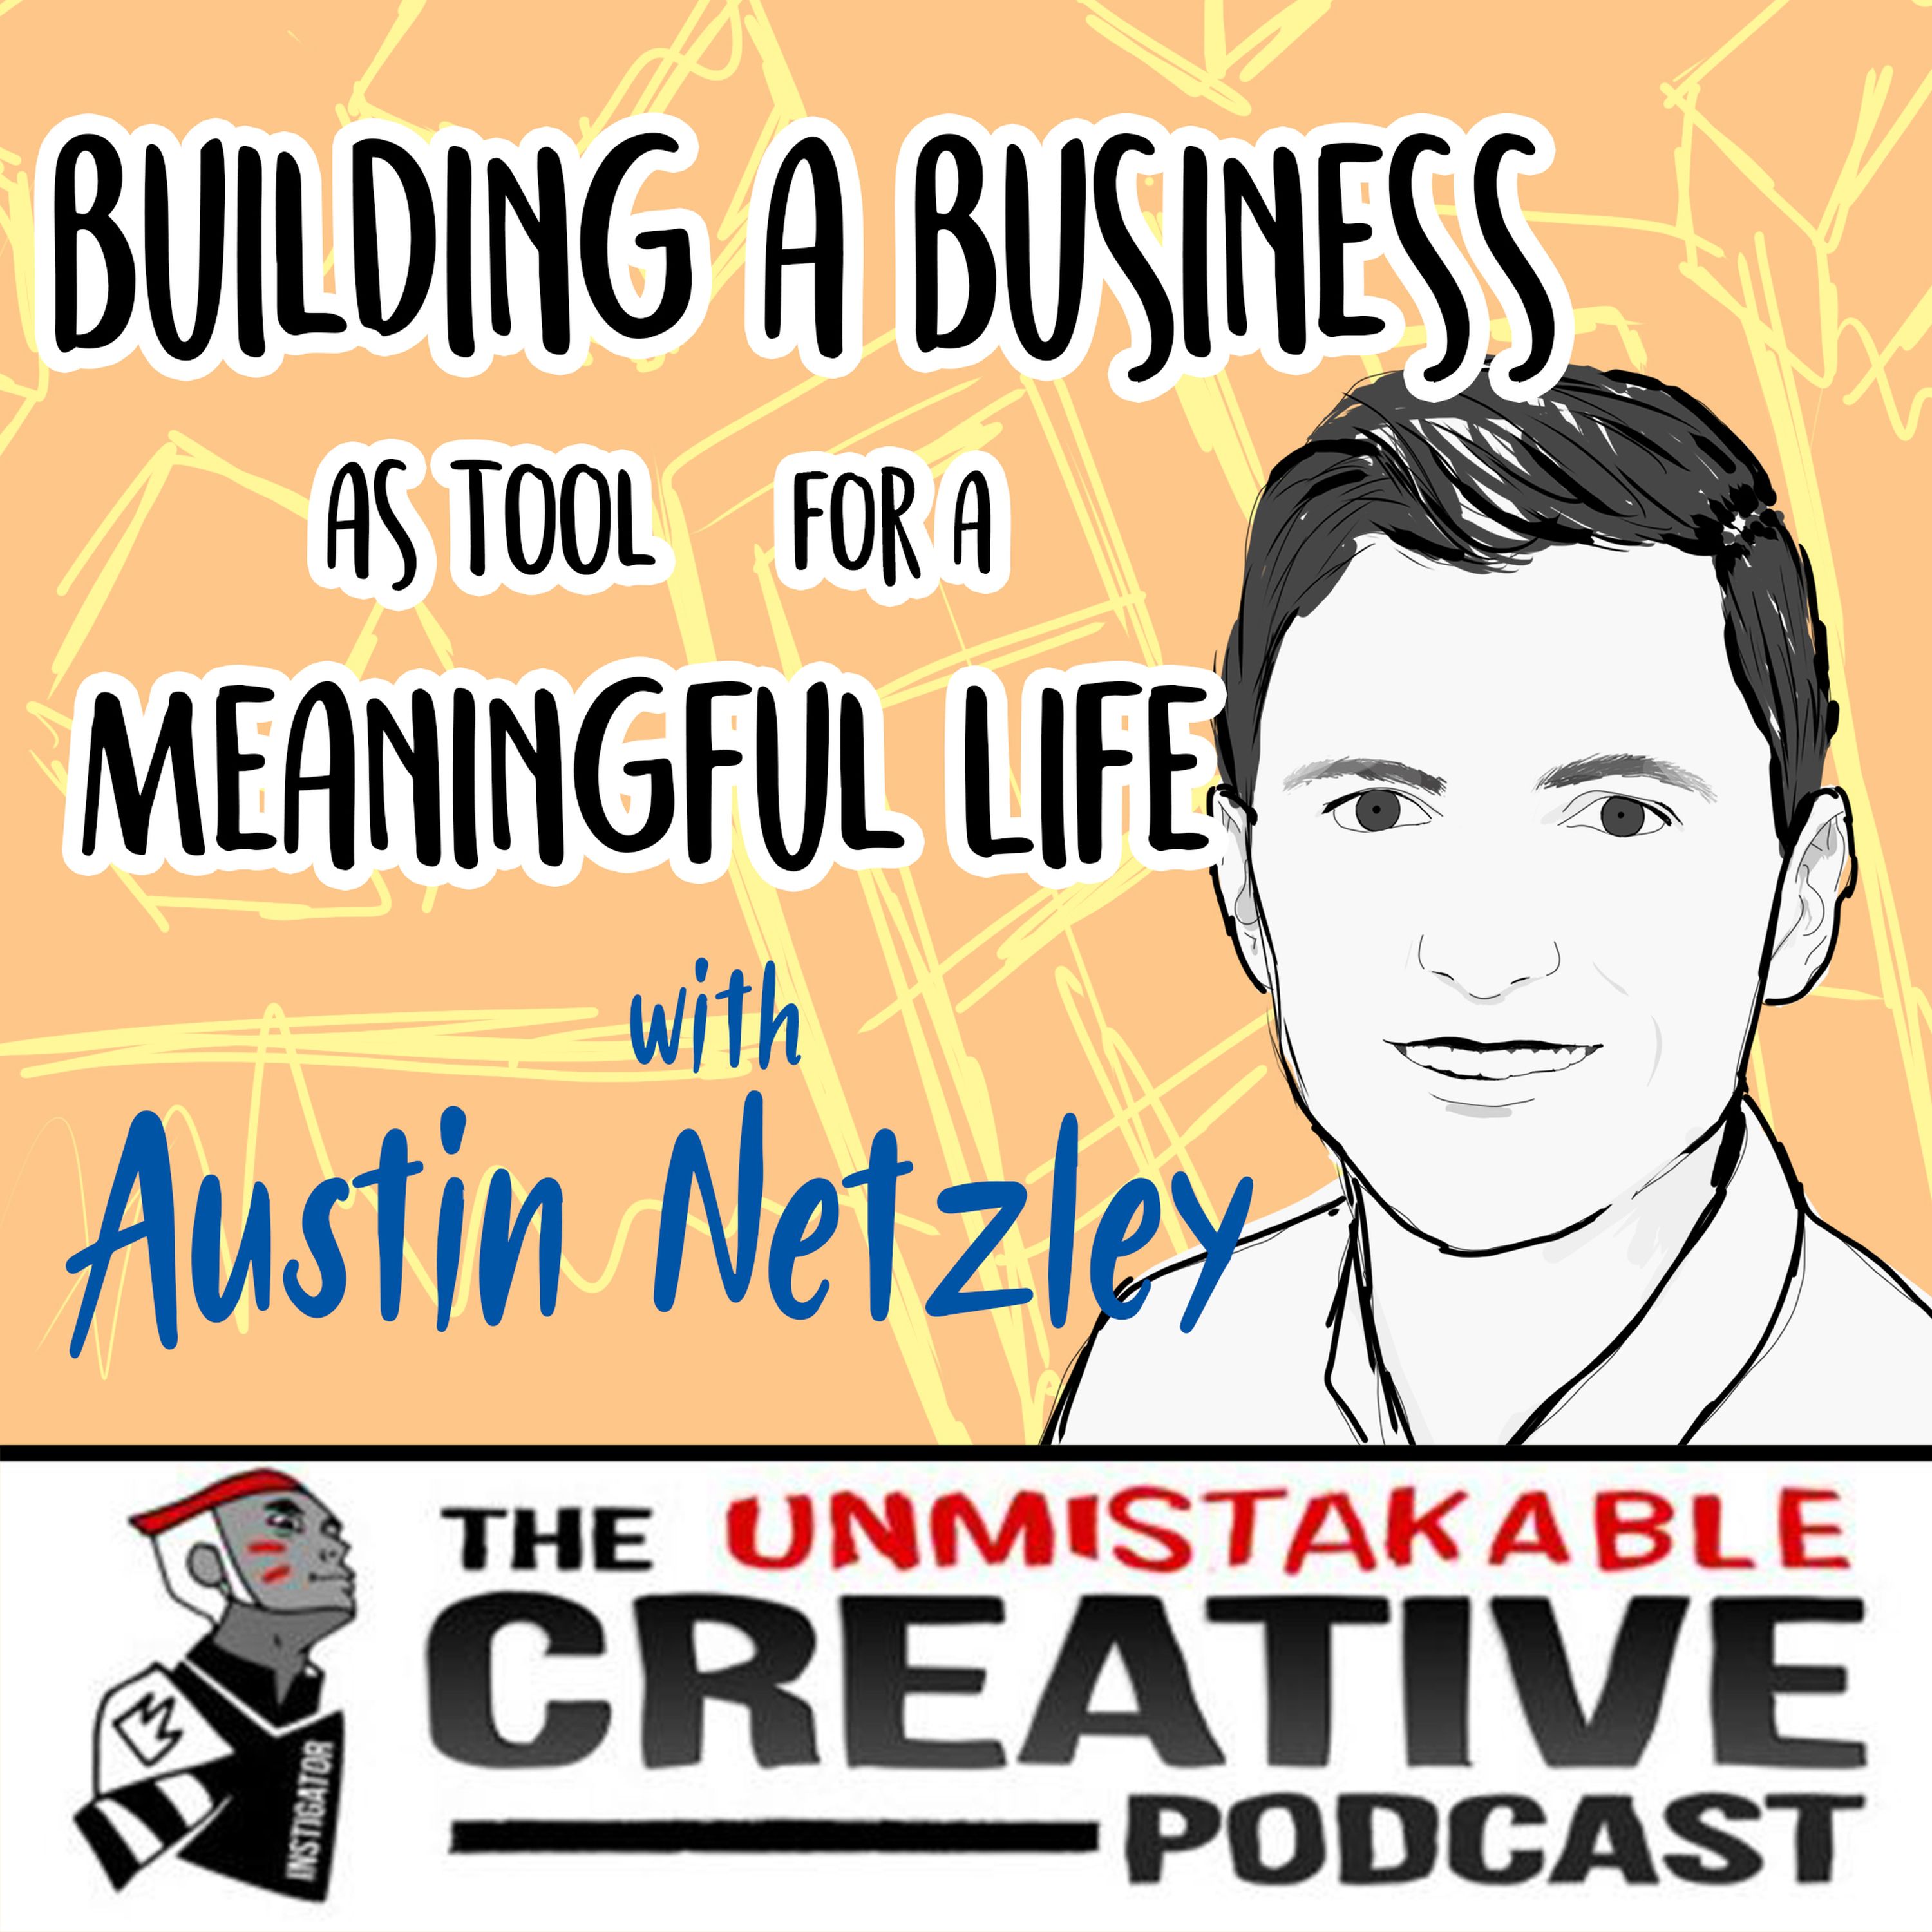 Building a Business as a Tool for a Meaningful Life with Austin Netzley